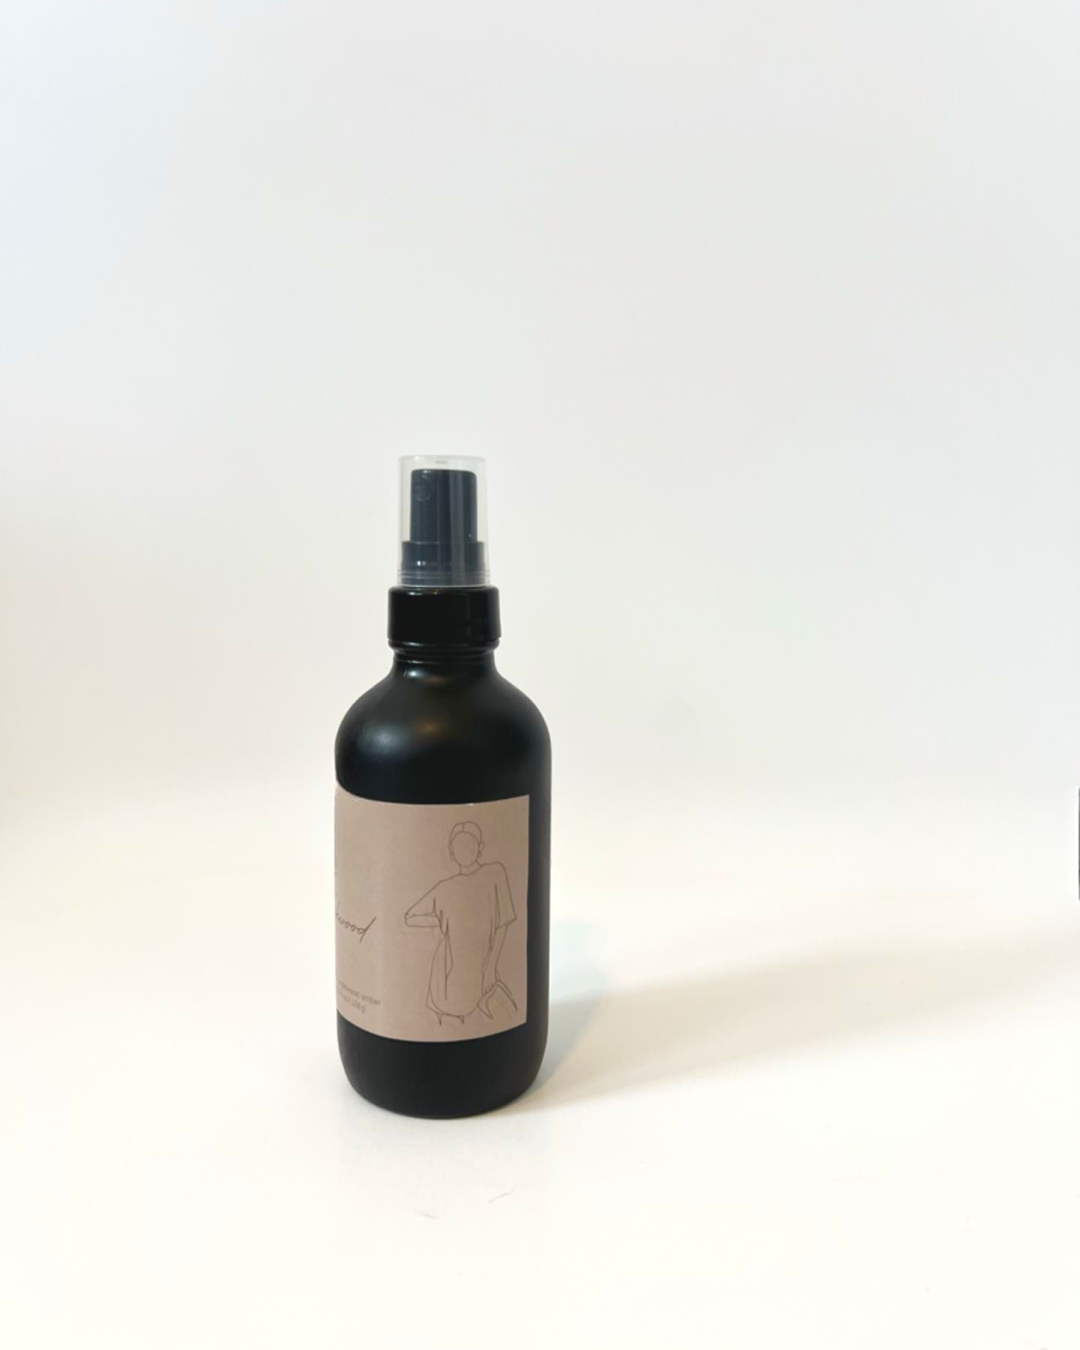 Amber and Teakwood Room and Body Spray